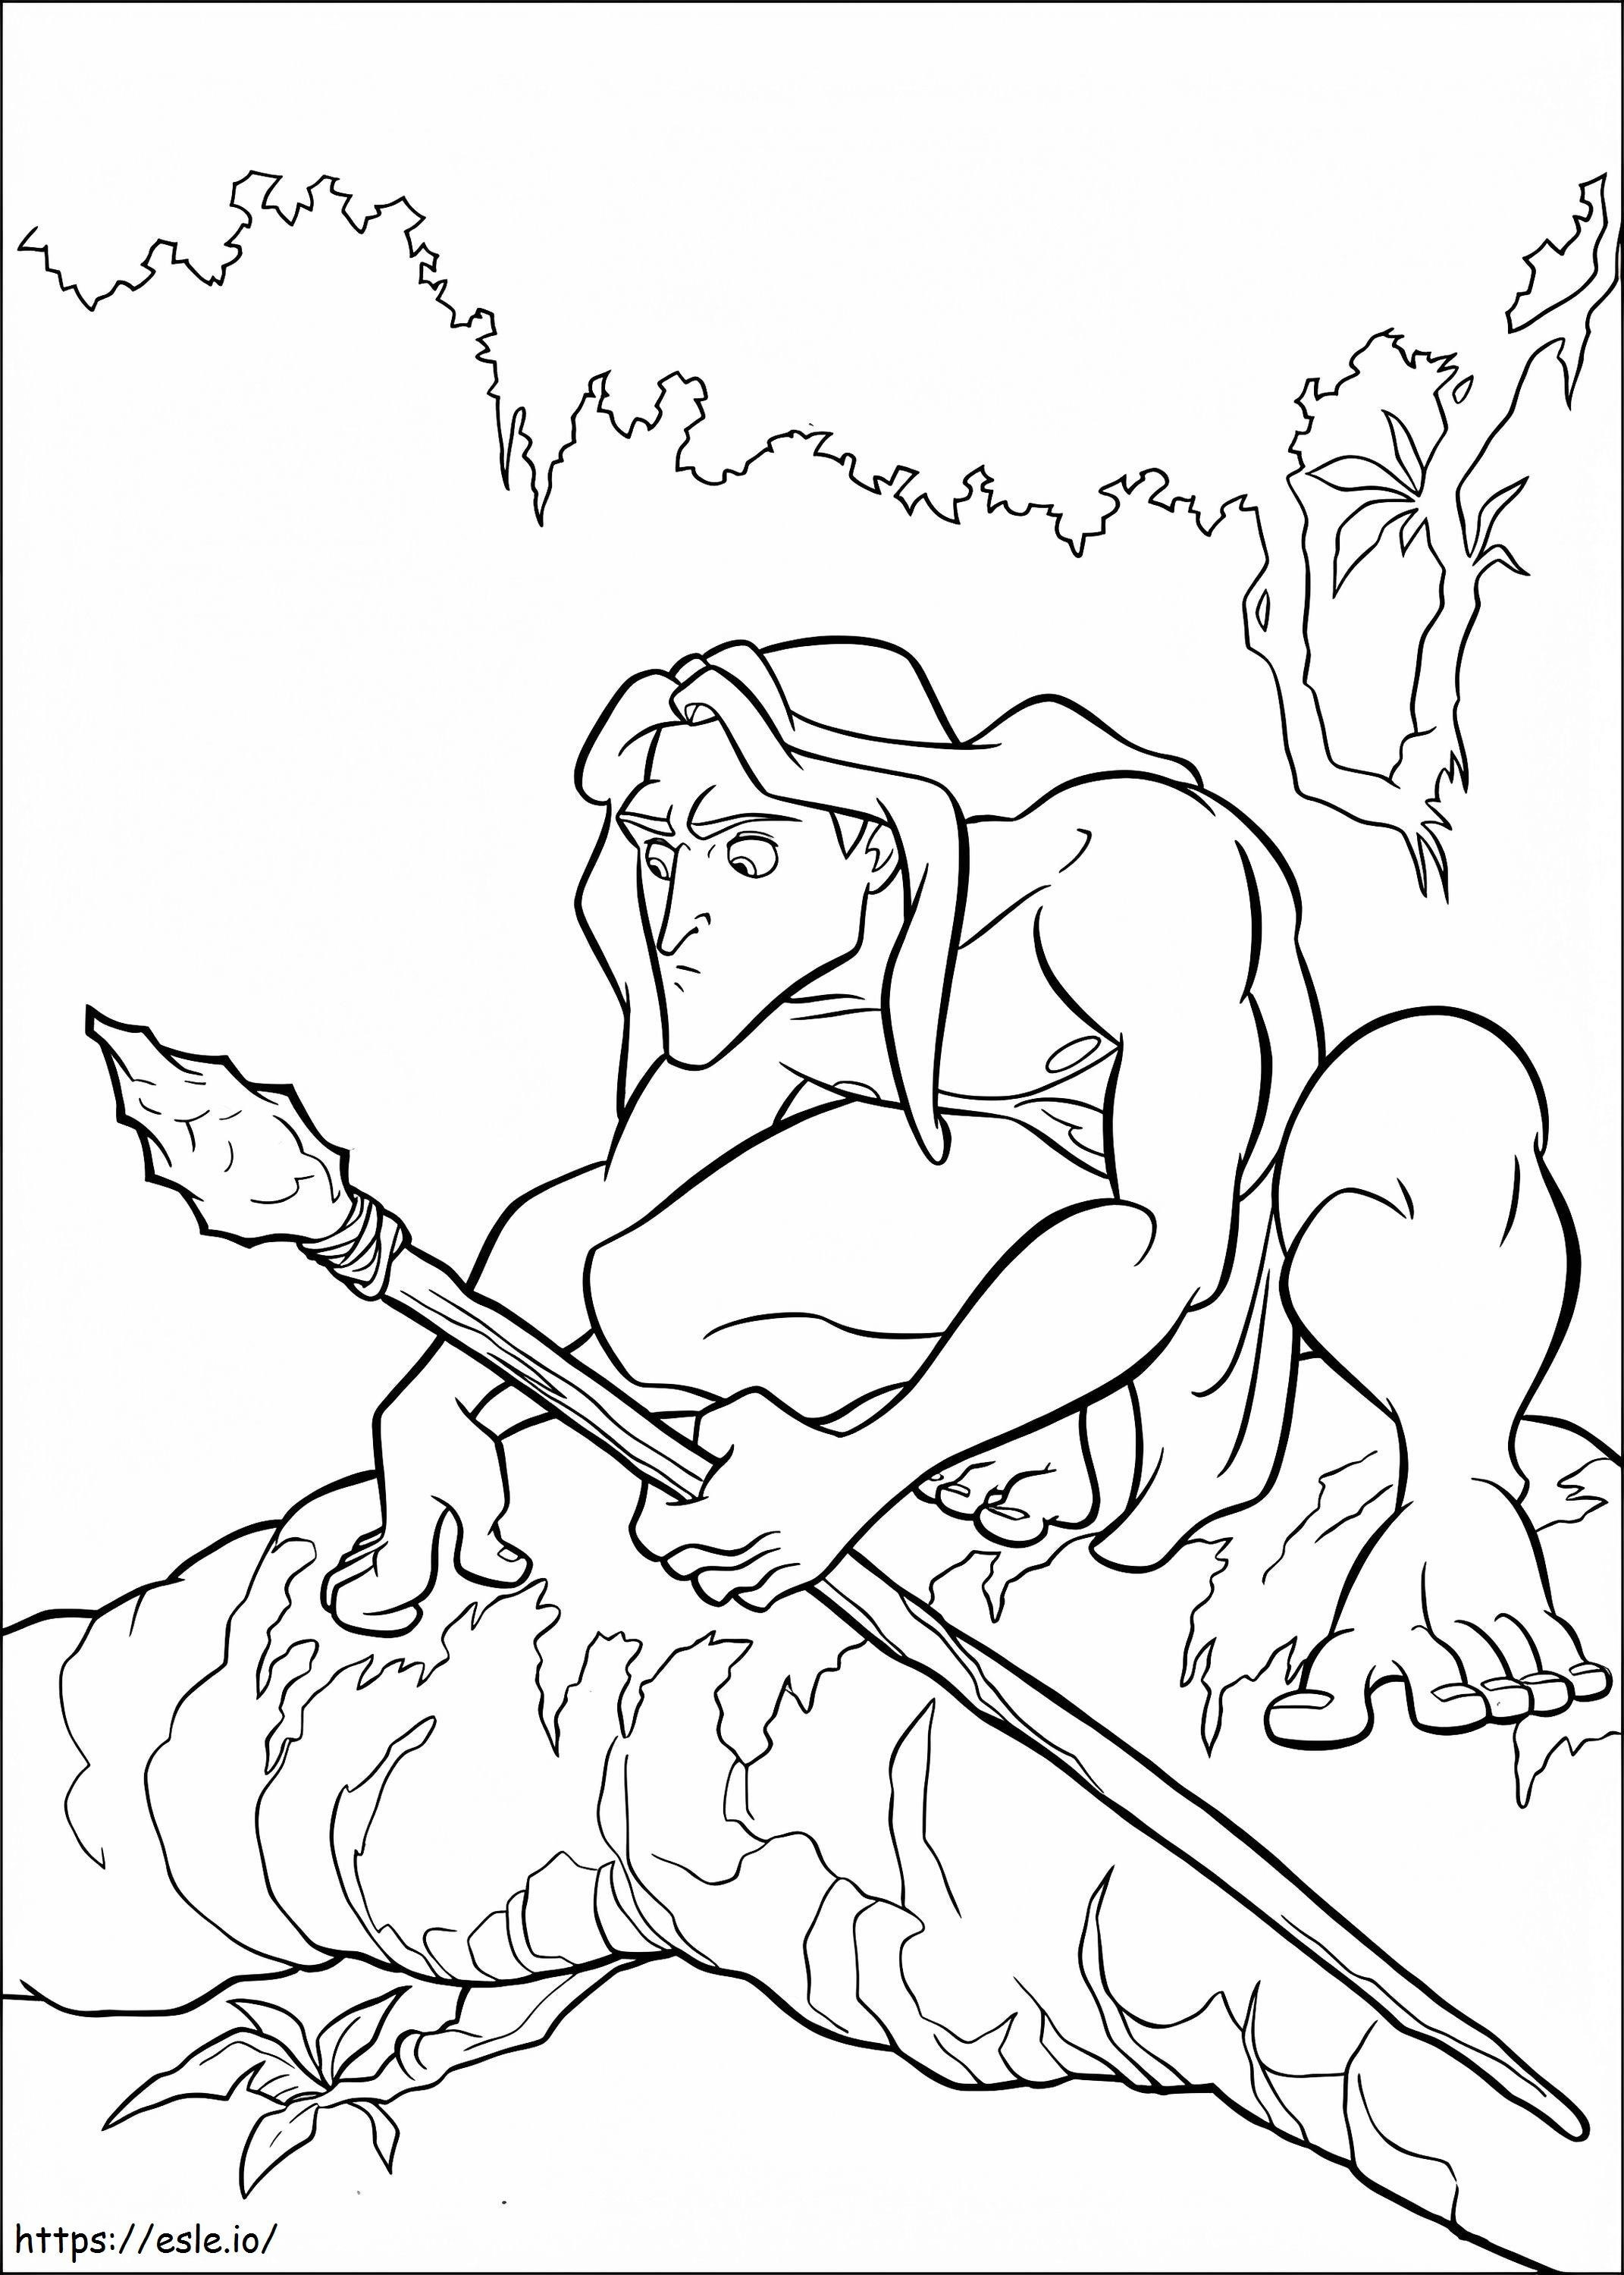 Tarzan Holding Weapons coloring page